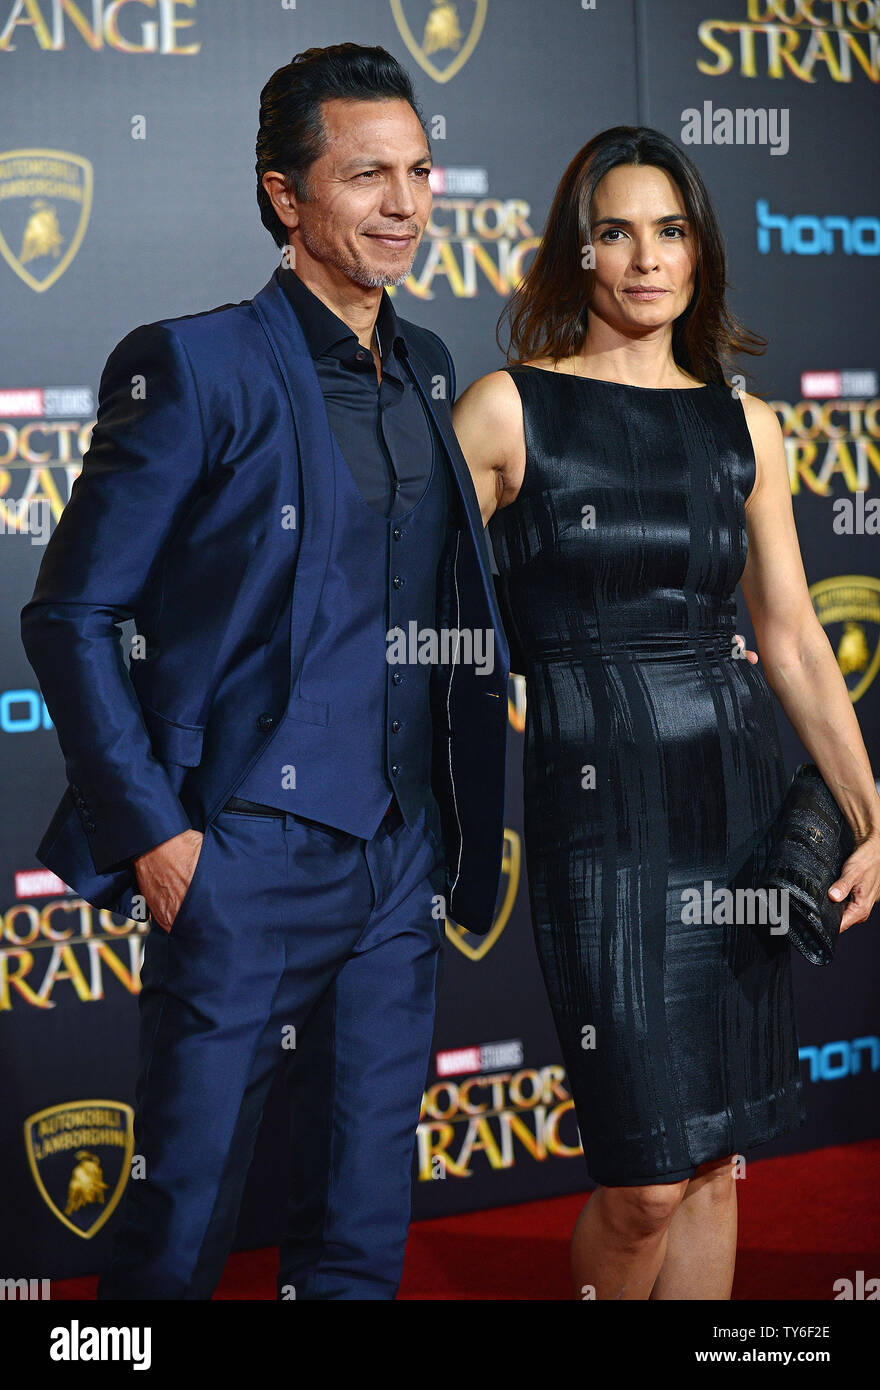 Benjamin Bratt and his wife Talisa Soto arrive at the world premiere of Marvel Studios' 'Doctor Strange' at the El Capitan Theatre in Los Angeles, California on October 20, 2016. Photo by Christine Chew/UPI Stock Photo